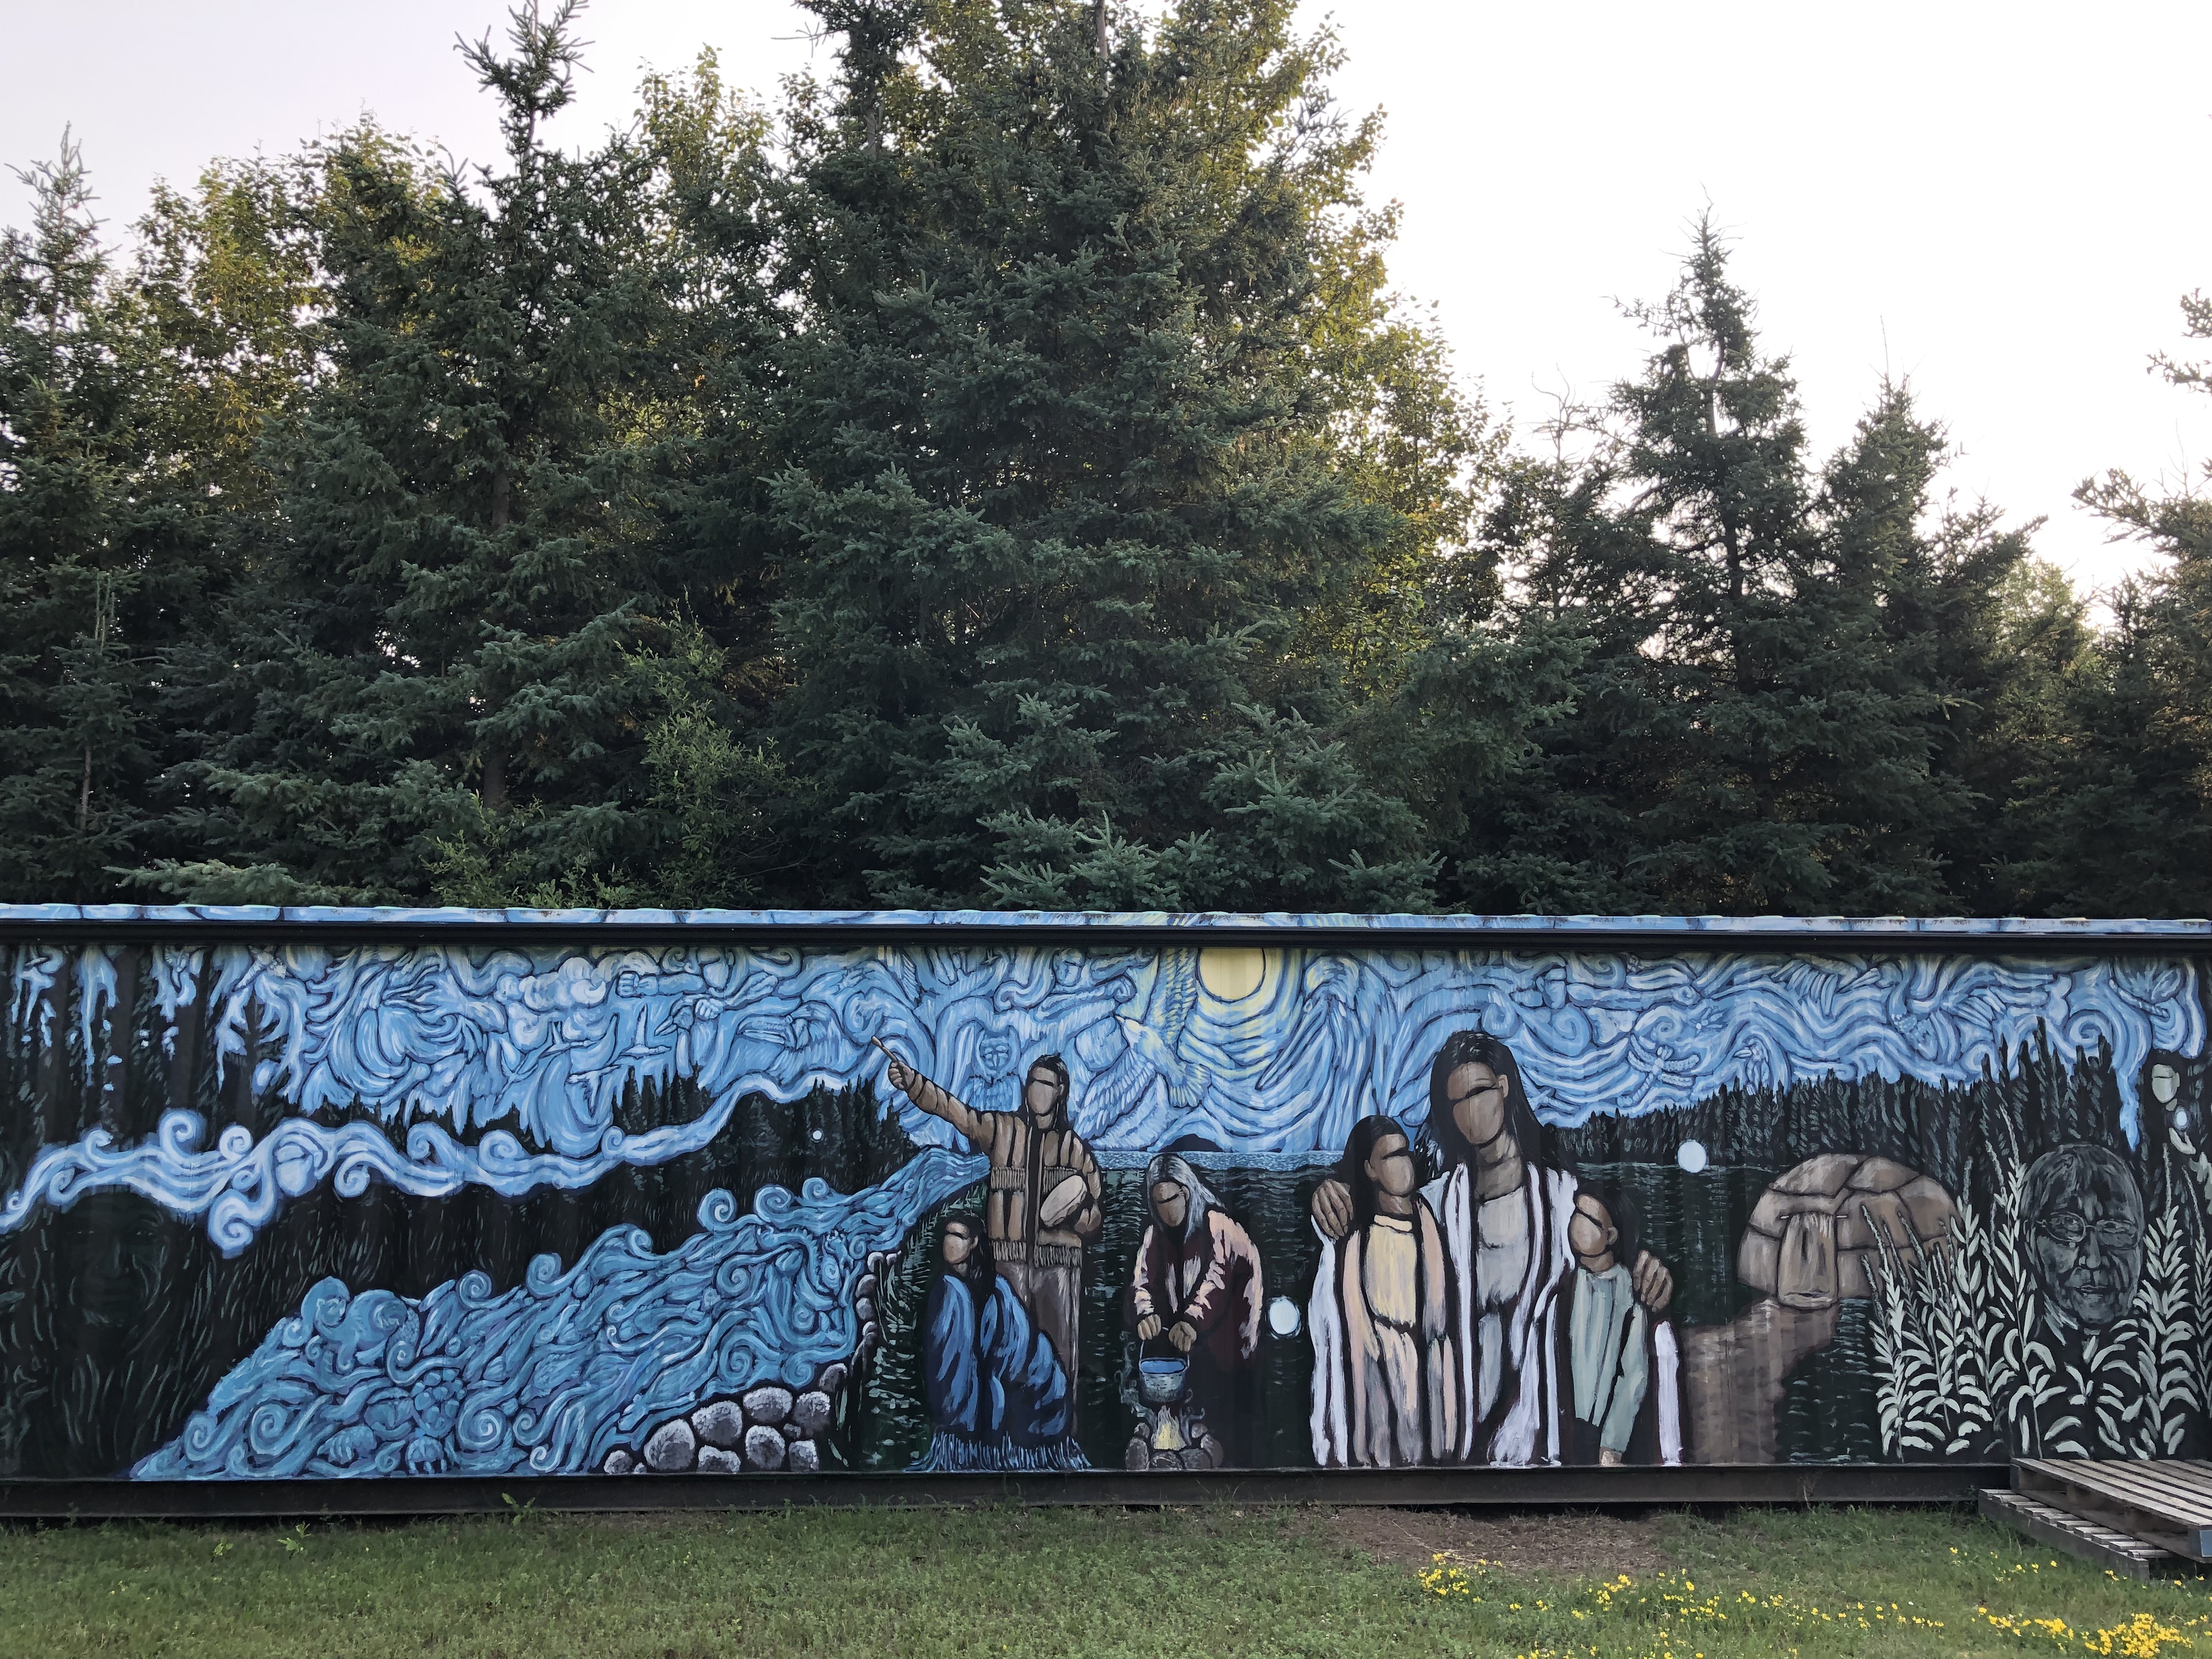 Painted c-can storage unit, located at the sweat lodge site, that was painted by Elliot Doxtater-Wynn in August 2011